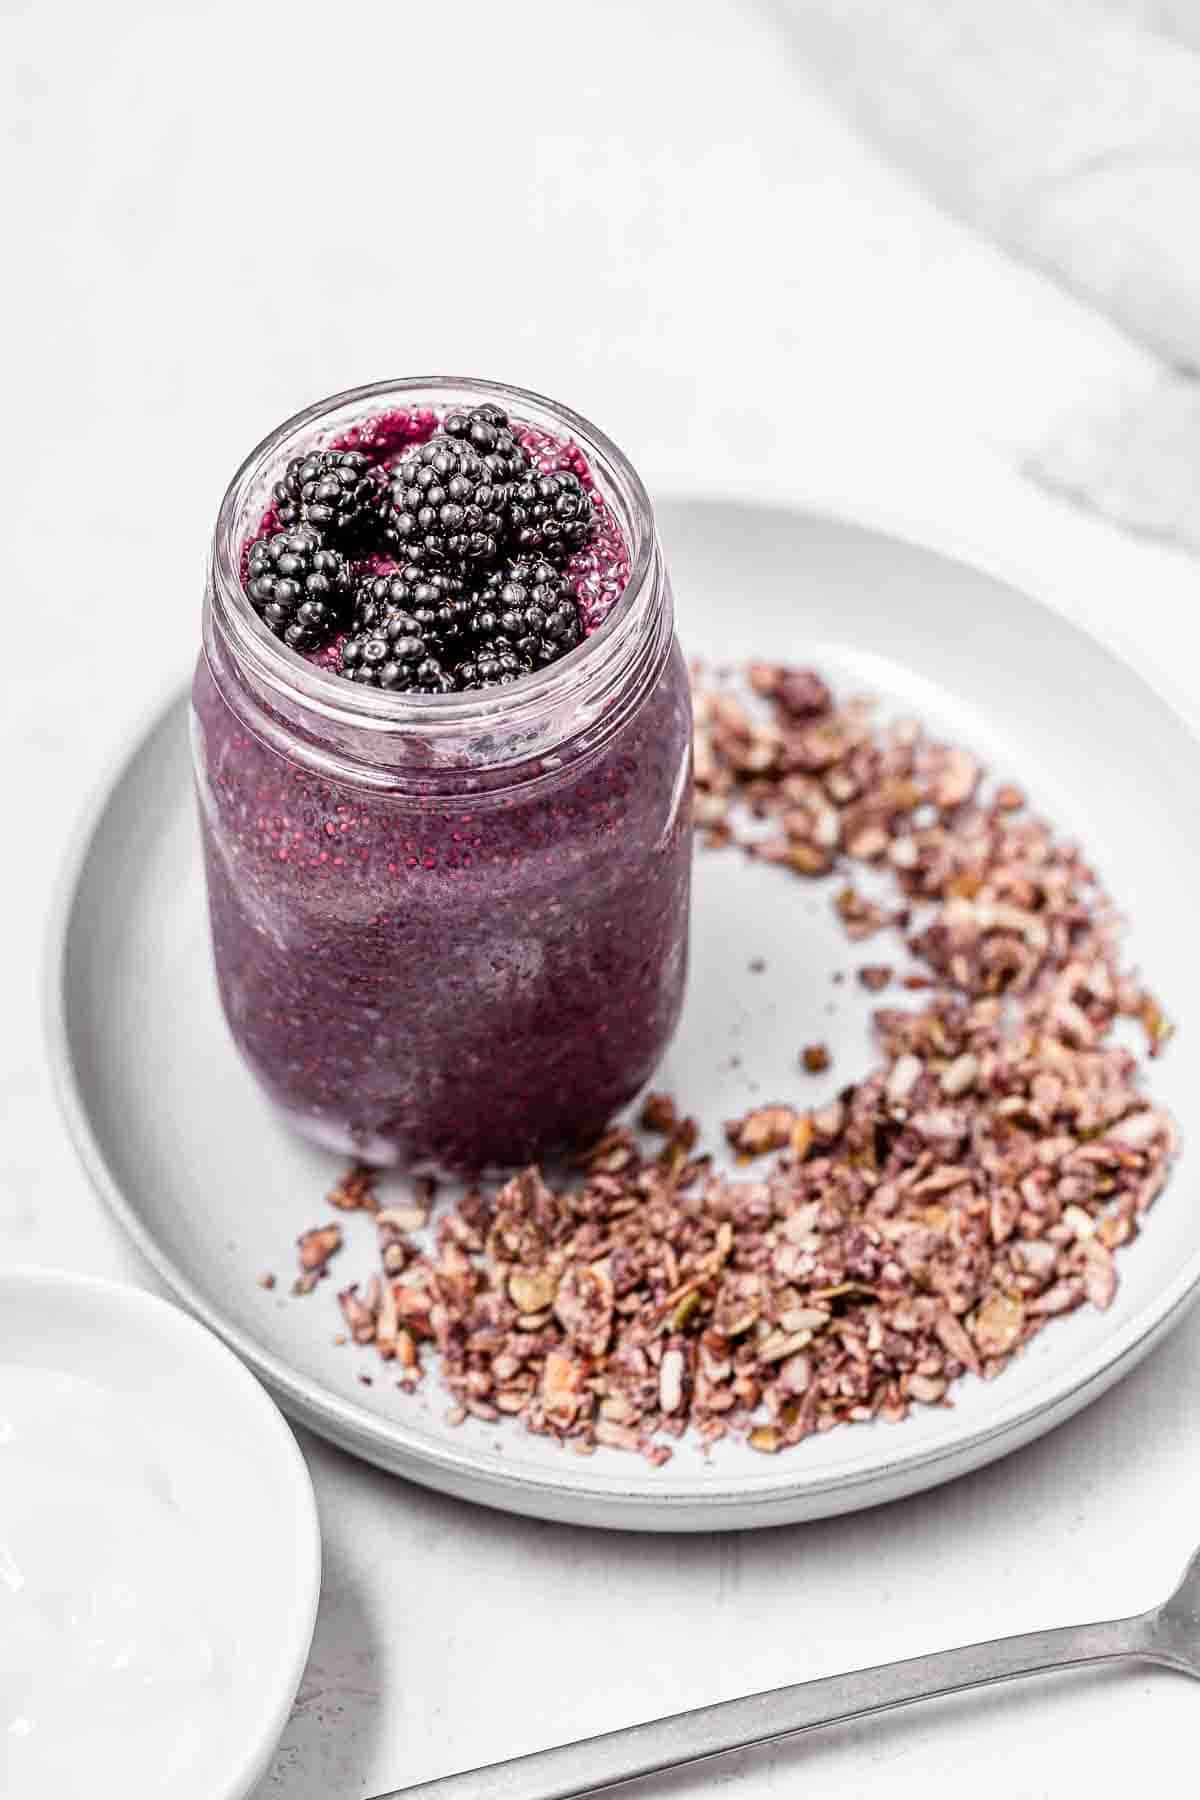 A jar of blackberry chia pudding on a grey plate filled with granola.